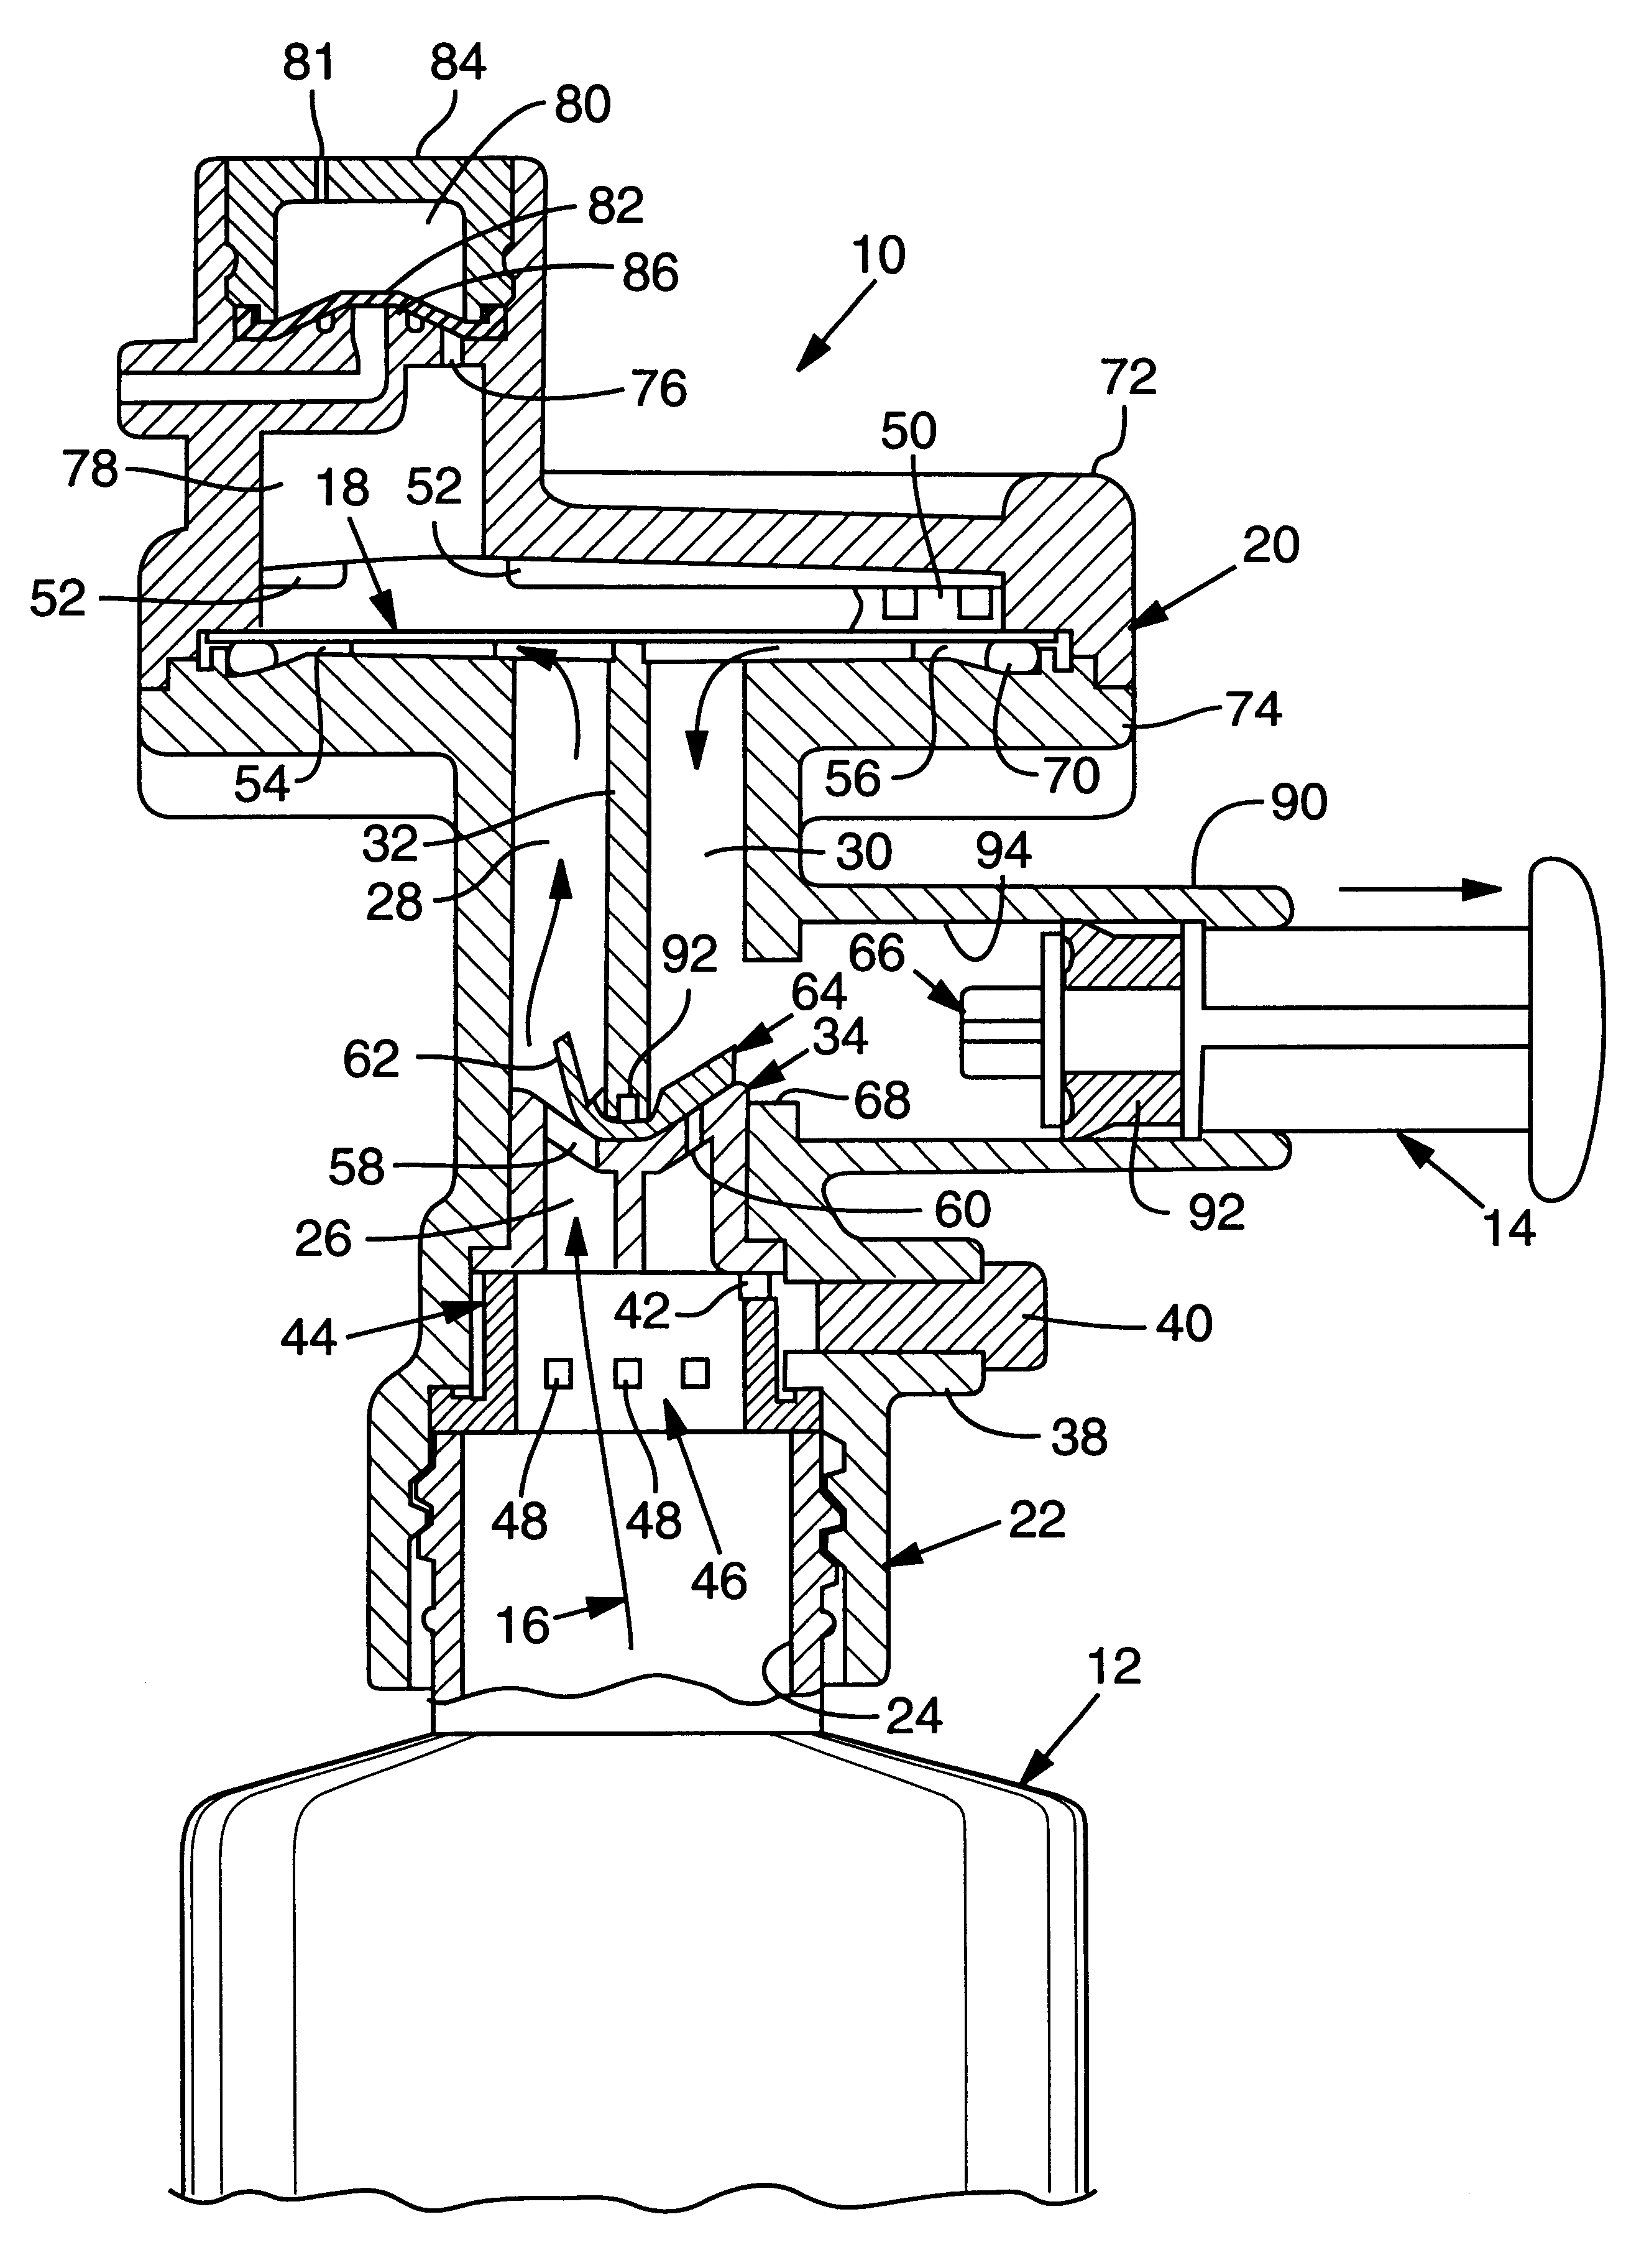 Method and apparatus for removing air locks within manually operated micro-filtration devices